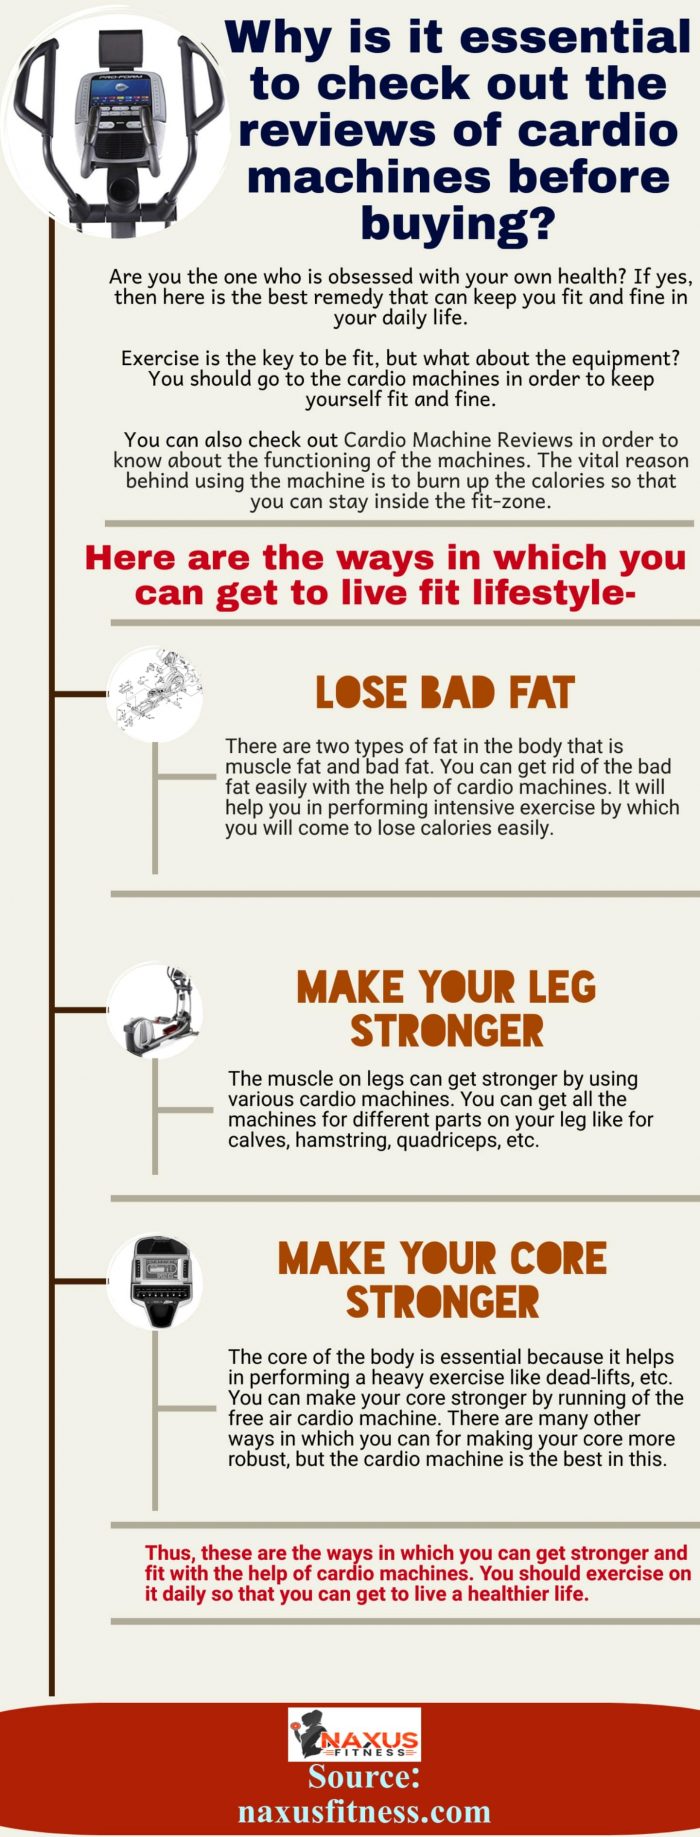 Reasons due to which you can come to use the cardio machine for your health